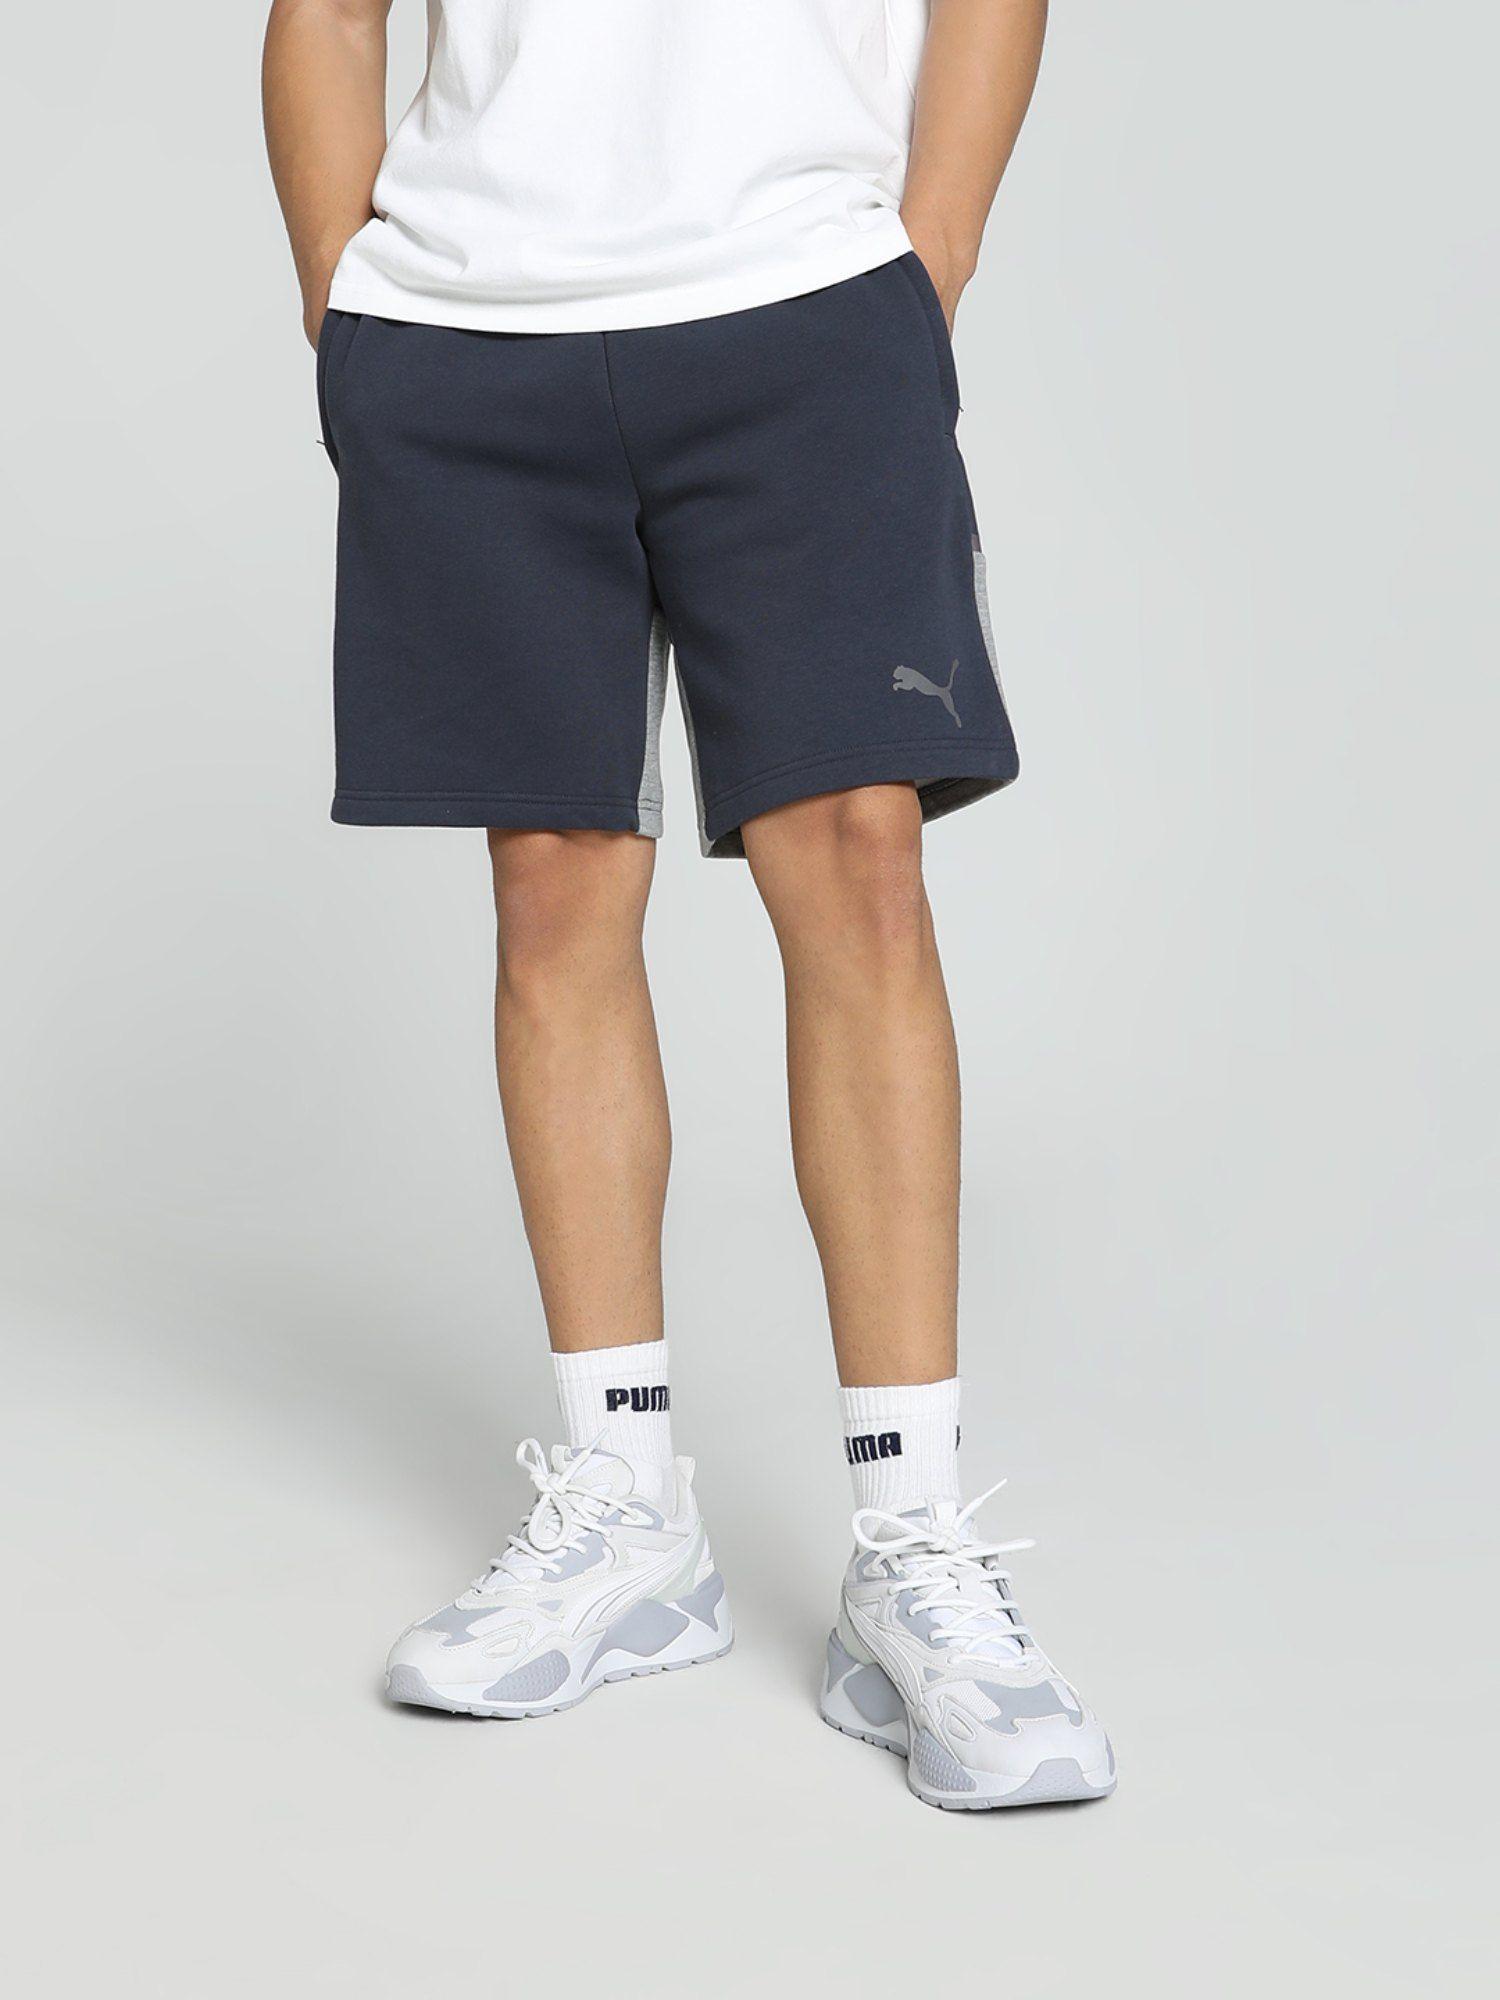 teamcup-casuals-men-navy-blue-shorts